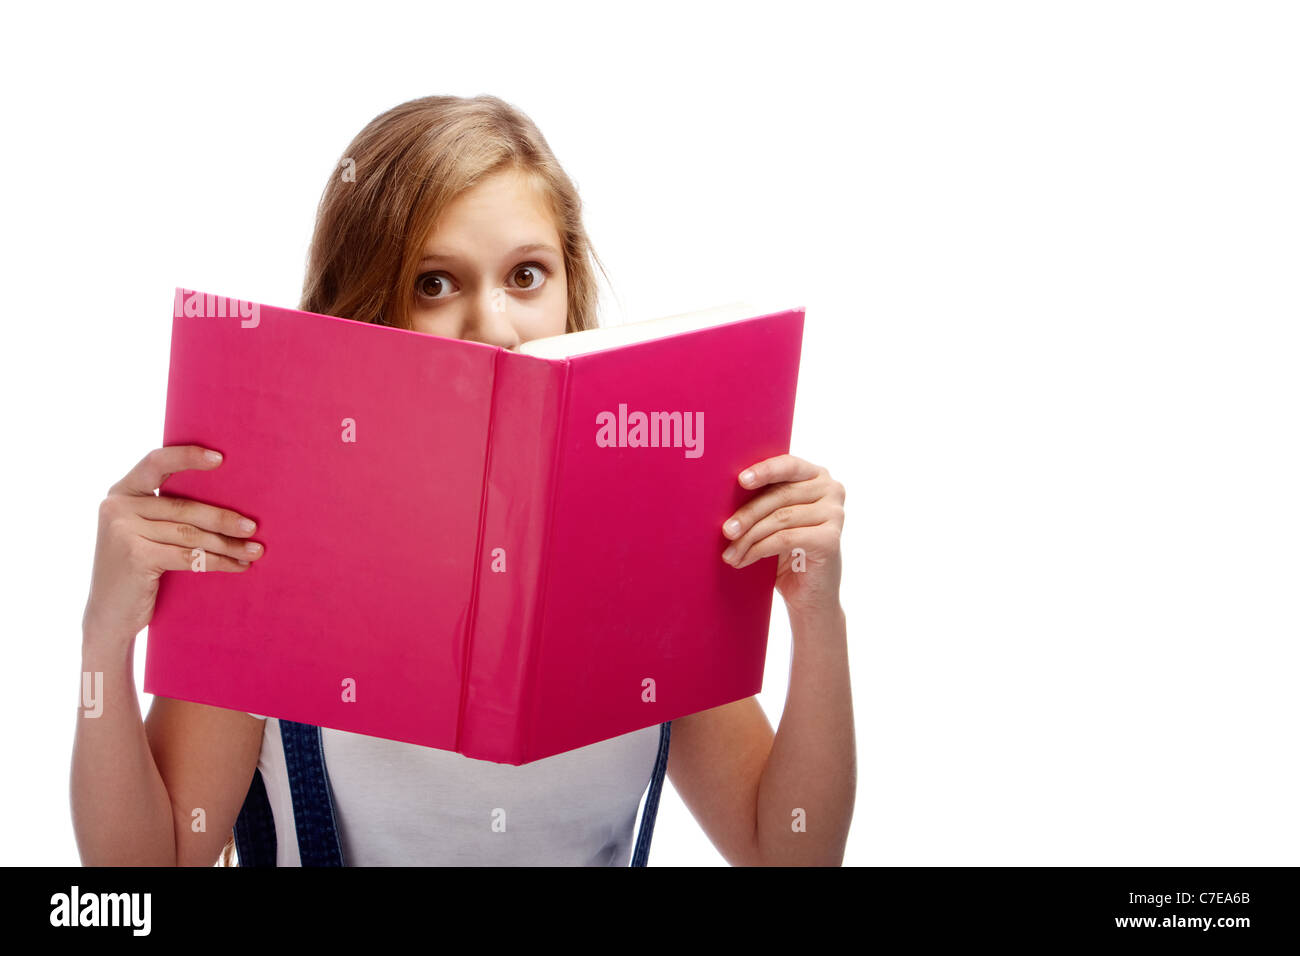 Cute girl peeking out of open book while reding it in isolation Stock Photo